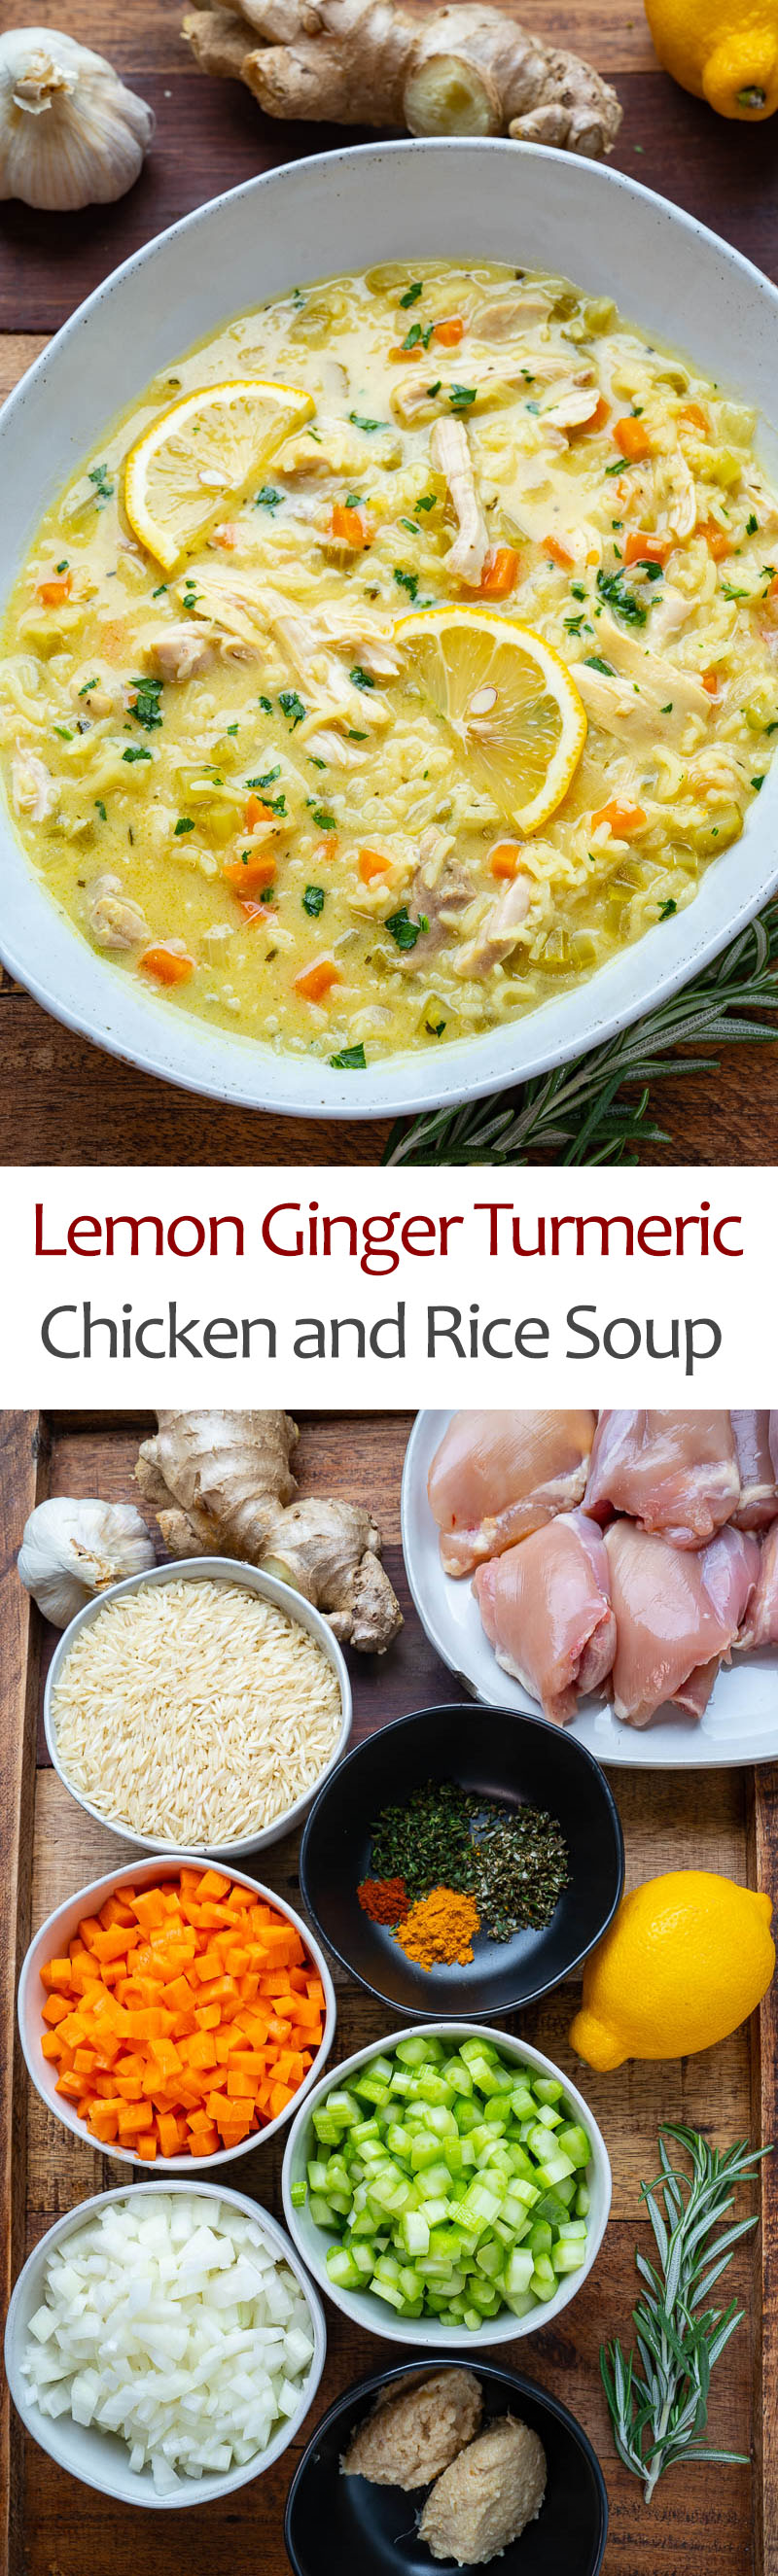 Lemon Ginger Turmeric Chicken and Rice Soup